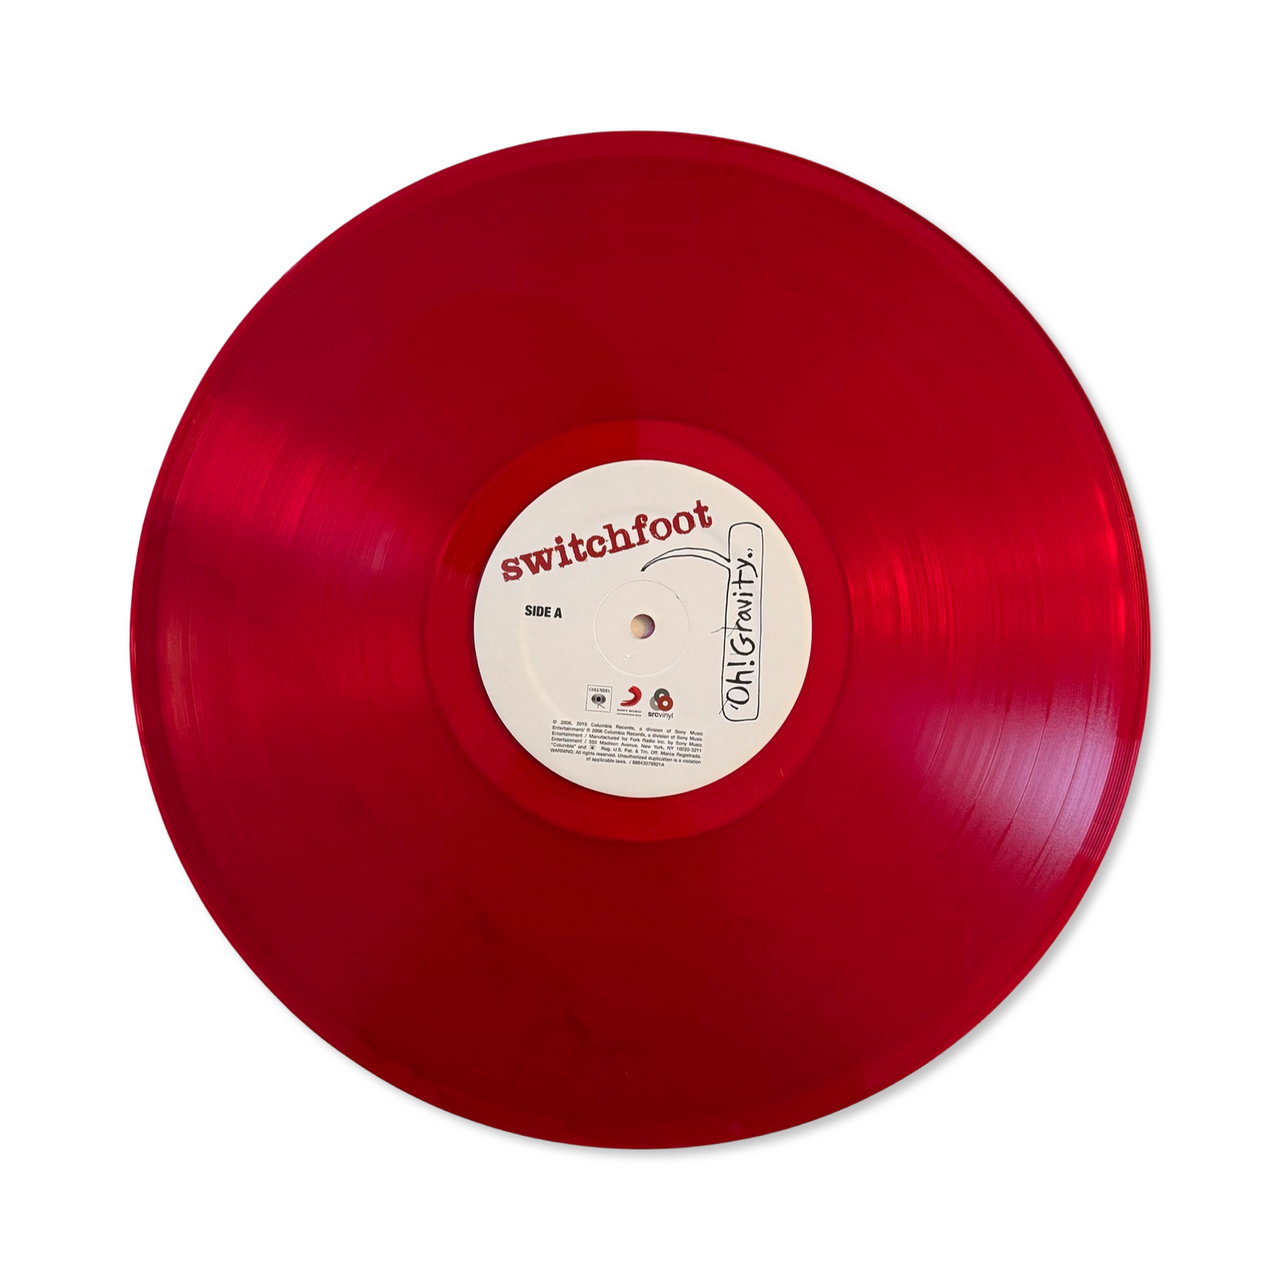 Switchfoot: Oh Gravity Vinyl LP (Red)